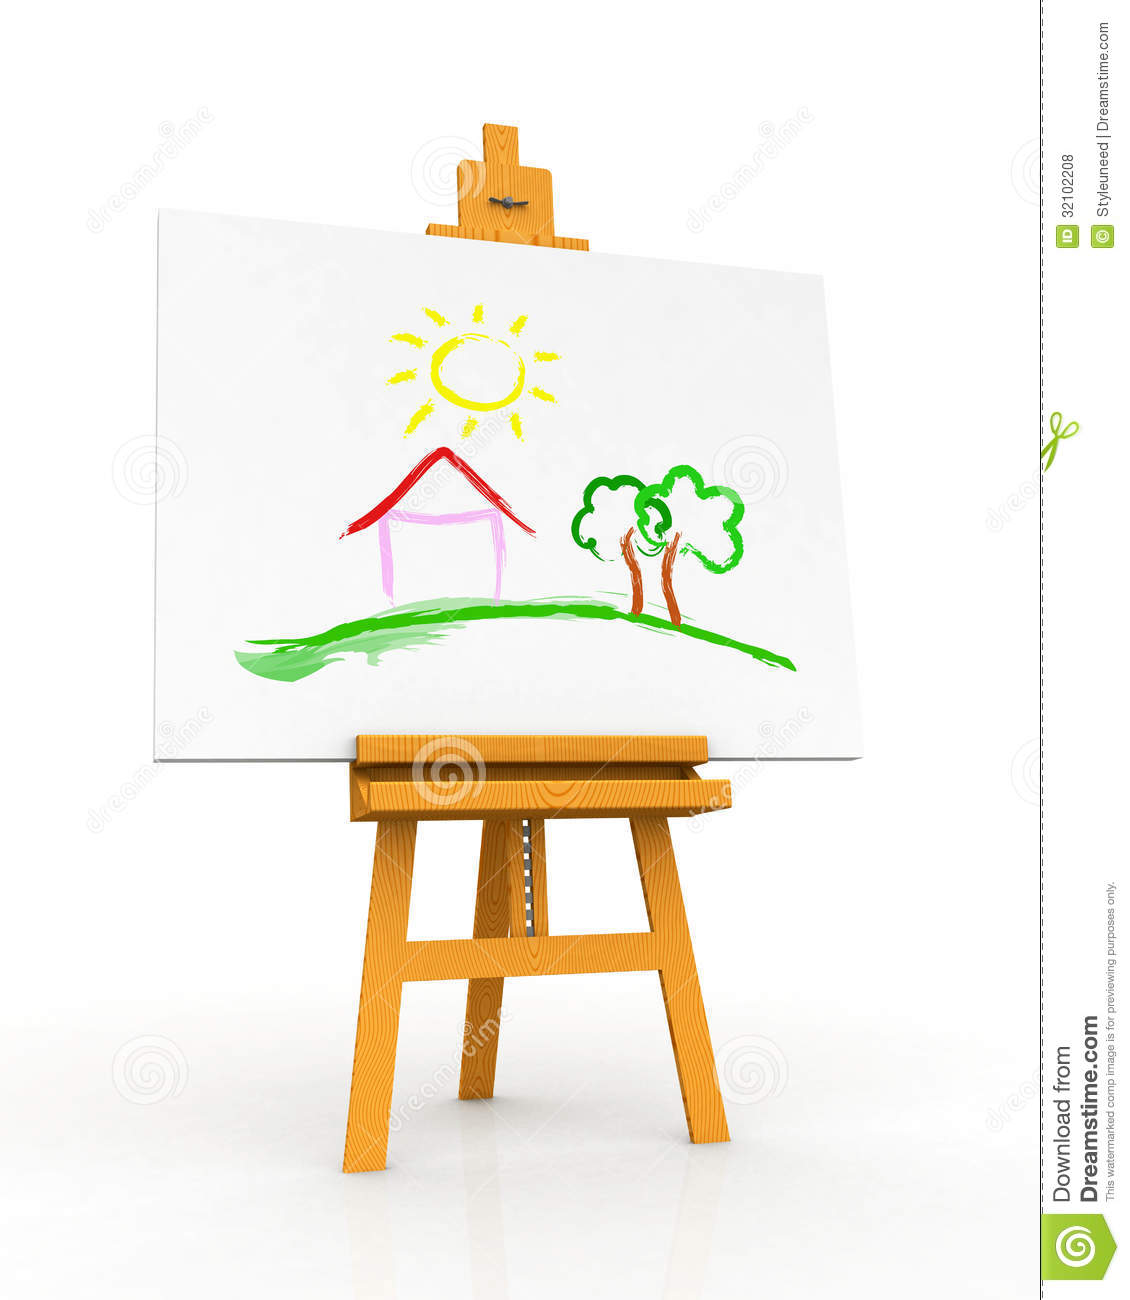 House Painting On Easel Royalty Free Stock Photos   Image  32102208